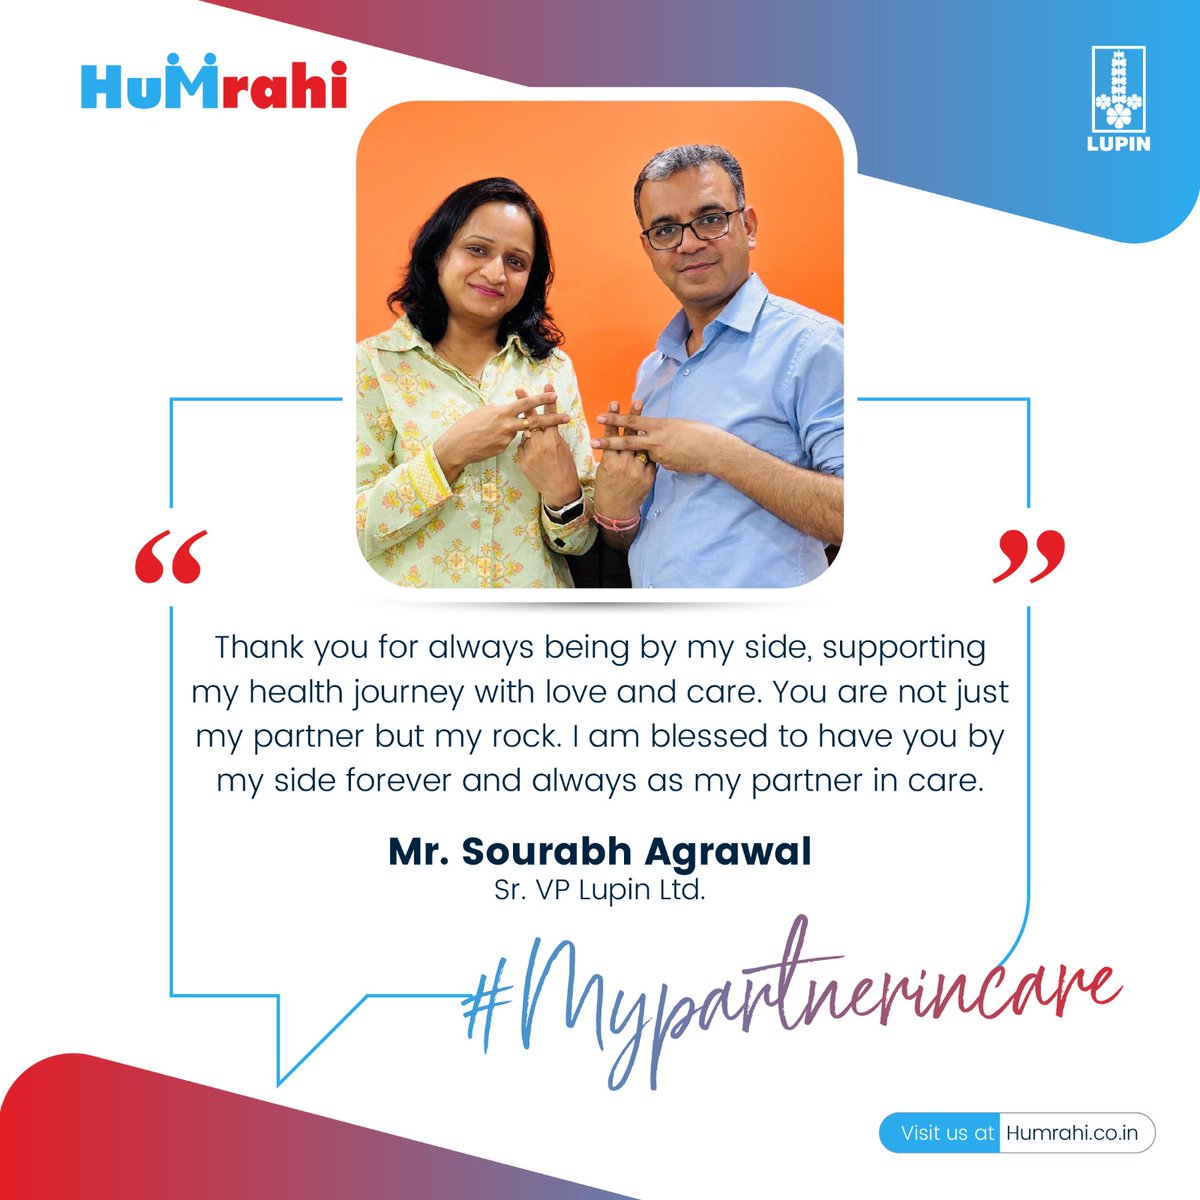 At Lupin, our leaders recognize and appreciate the invaluable contributions of their partners-in-care, the women who tirelessly support and promote health and happiness for all. Join us at Humrahi for more. #Lupin #LupinIndia #Humrahi #MyPartnerInCare